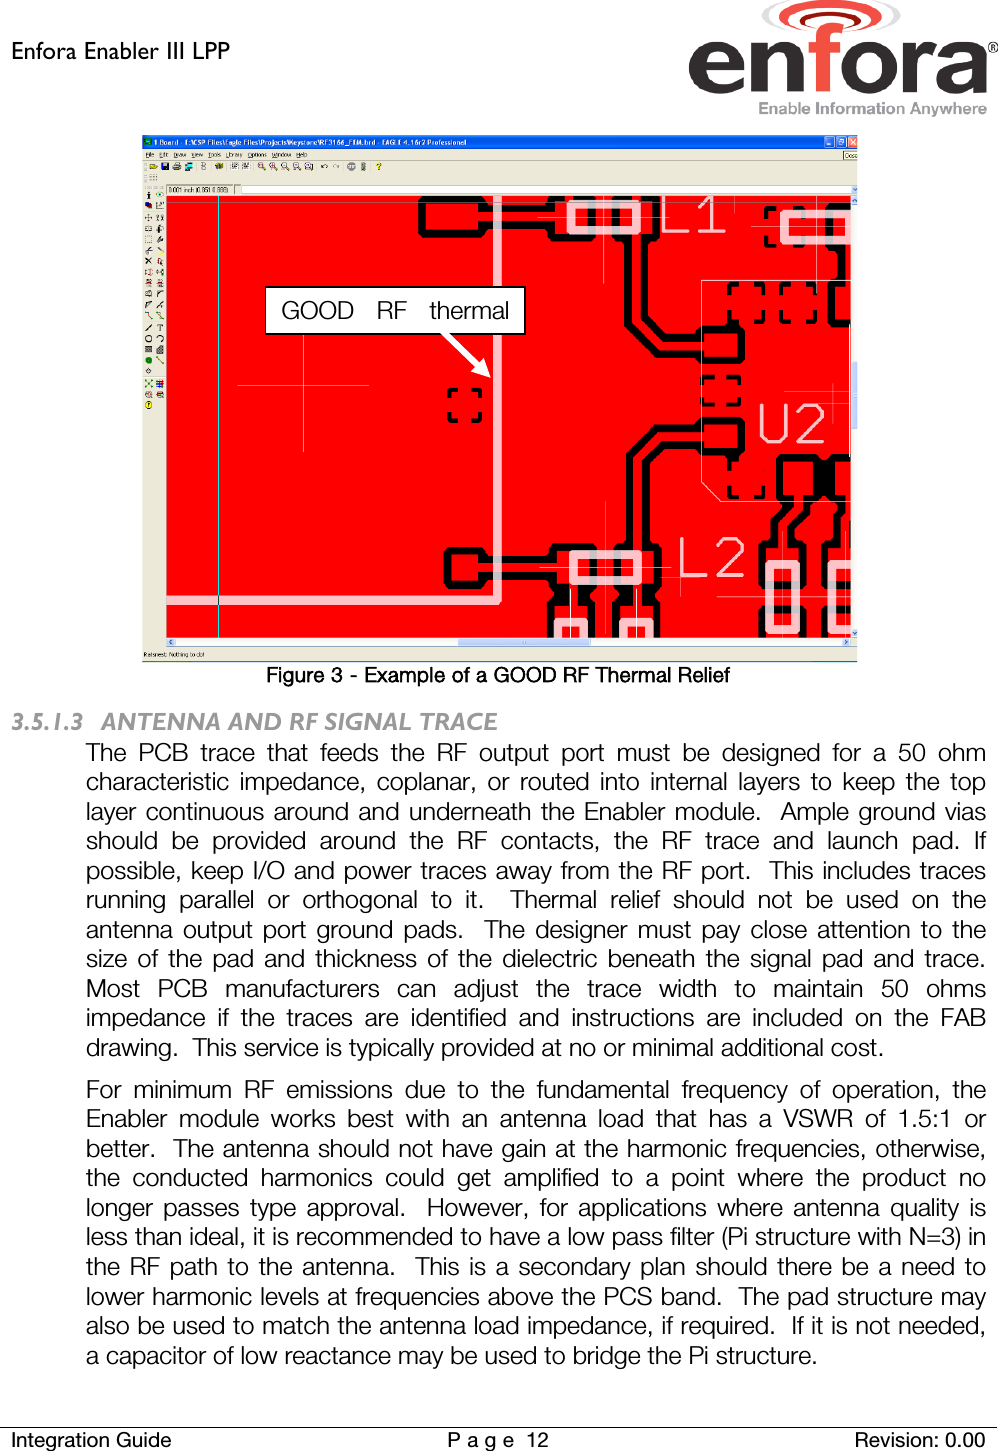 Enfora Enabler III LPP    Integration Guide Page 12 Revision: 0.00   Figure 3 - Example of a GOOD RF Thermal Relief 3.5.1.3 ANTENNA AND RF SIGNAL TRACE The PCB trace that feeds the RF output port must be designed for a 50 ohm characteristic impedance, coplanar, or routed into internal layers to keep the top layer continuous around and underneath the Enabler module.  Ample ground vias should be provided around the RF contacts, the RF trace and launch pad. If possible, keep I/O and power traces away from the RF port.  This includes traces running parallel or orthogonal to it.  Thermal relief should not be used on the antenna output port ground pads.  The designer must pay close attention to the size of the pad and thickness of the dielectric beneath the signal pad and trace.  Most PCB manufacturers can adjust the trace width to maintain 50 ohms impedance if the traces are identified and instructions are included on the FAB drawing.  This service is typically provided at no or minimal additional cost. For minimum RF emissions due to the fundamental frequency of operation, the Enabler module works best with an antenna load that has a VSWR of 1.5:1 or better.  The antenna should not have gain at the harmonic frequencies, otherwise, the conducted harmonics could get amplified to a point where the product no longer passes type approval.  However, for applications where antenna quality is less than ideal, it is recommended to have a low pass filter (Pi structure with N=3) in the RF path to the antenna.  This is a secondary plan should there be a need to lower harmonic levels at frequencies above the PCS band.  The pad structure may also be used to match the antenna load impedance, if required.  If it is not needed, a capacitor of low reactance may be used to bridge the Pi structure. GOOD RF thermal  